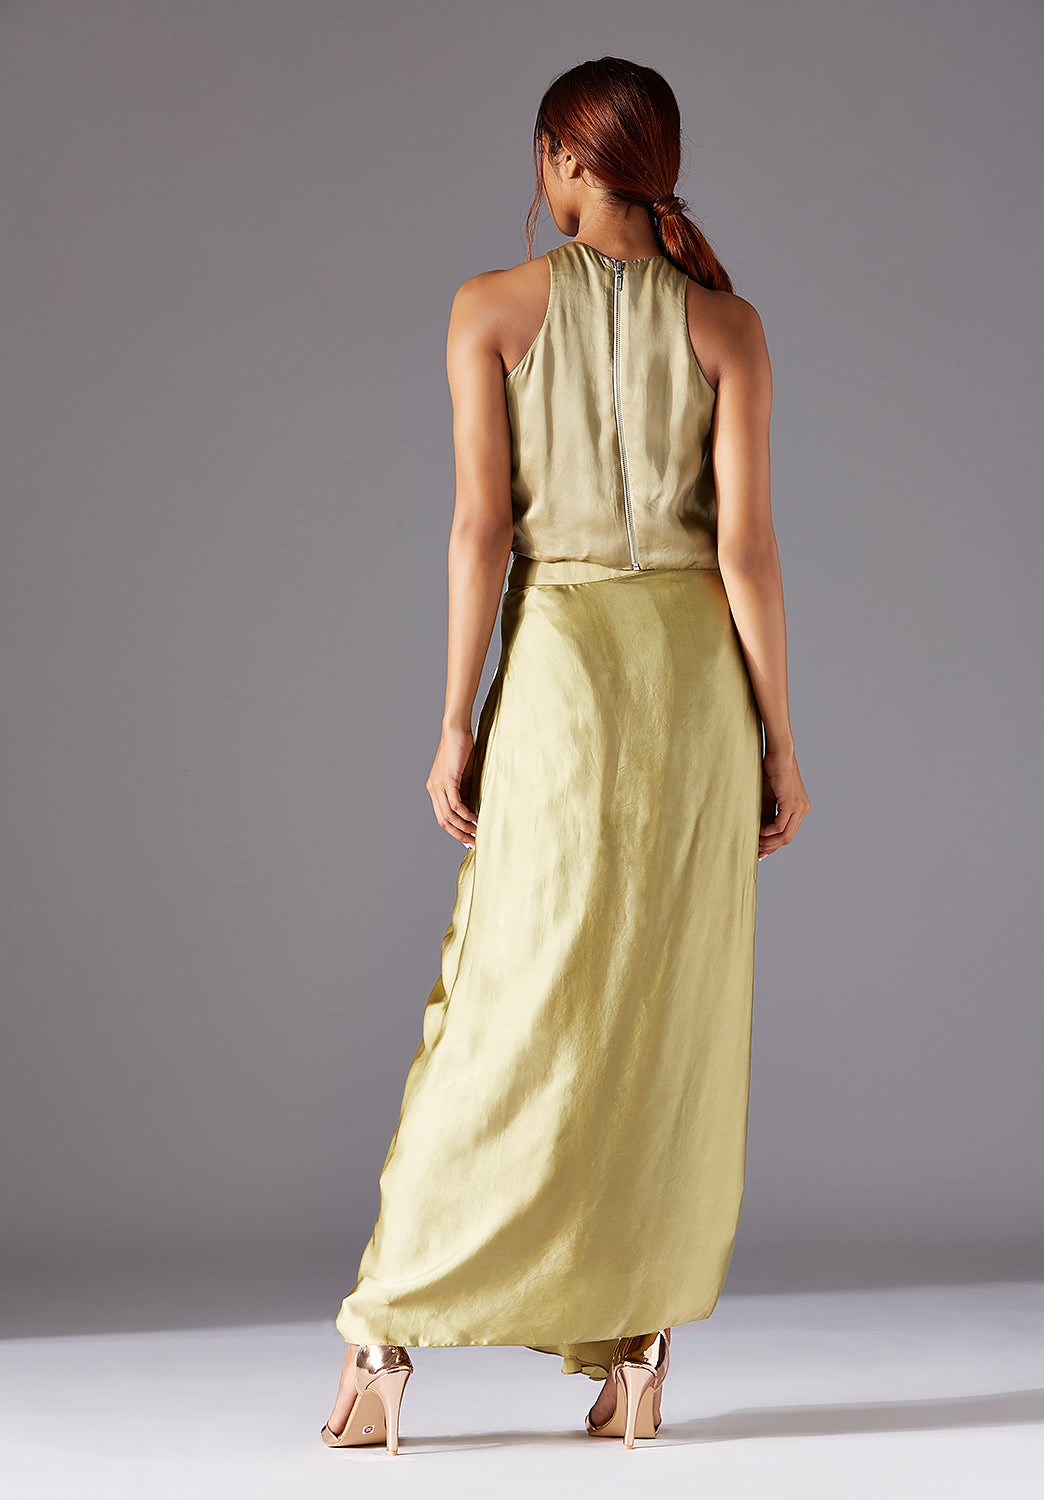 Mima Mounds Top With Draped Lungi Skirt and Living Stole- Dupatta